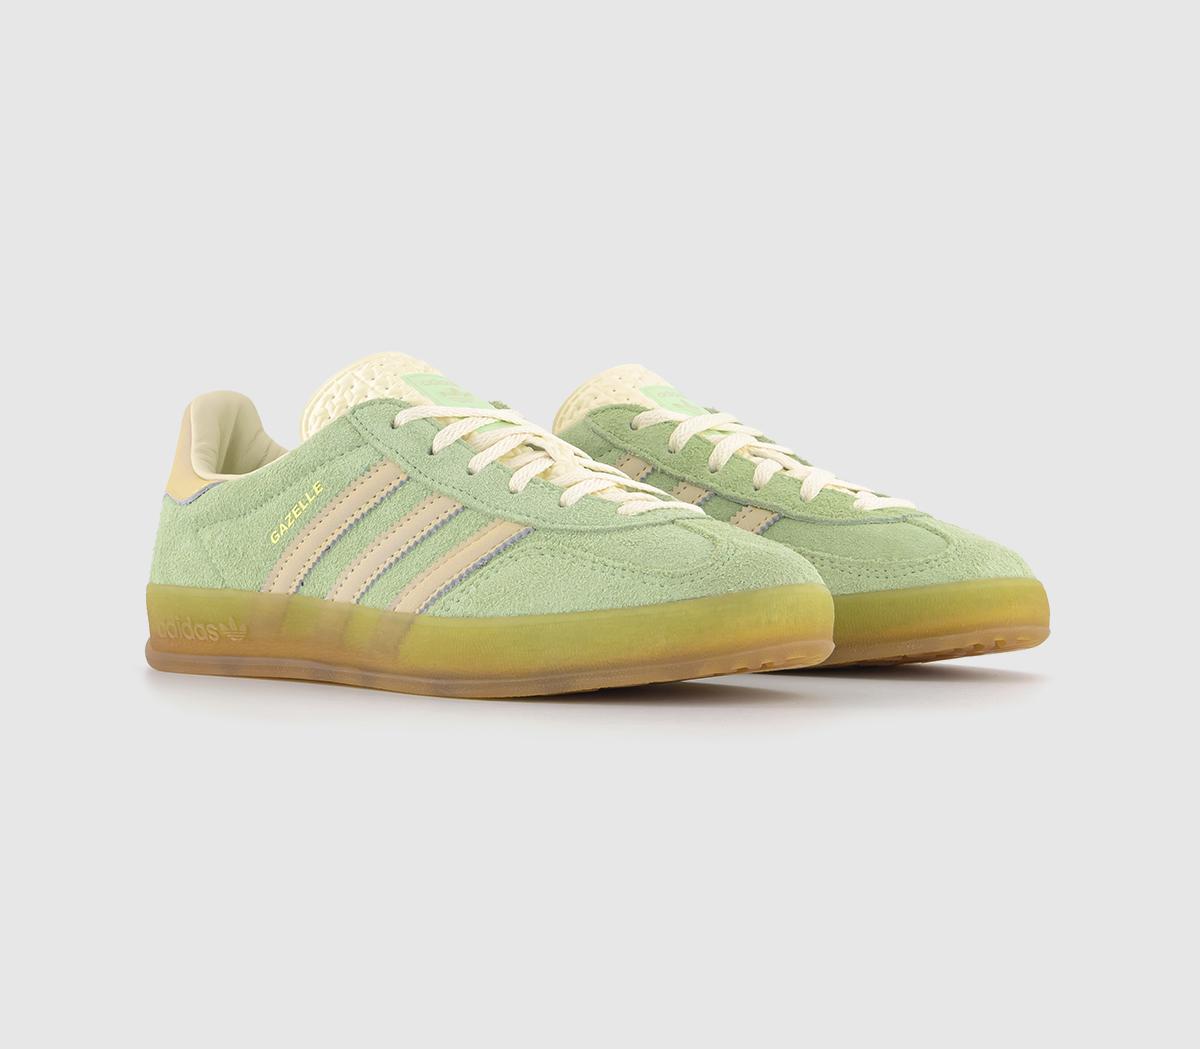 Adidas Womens Gazelle Indoor Trainers Semi Green Spark Almost Yellow Cream White, 6.5